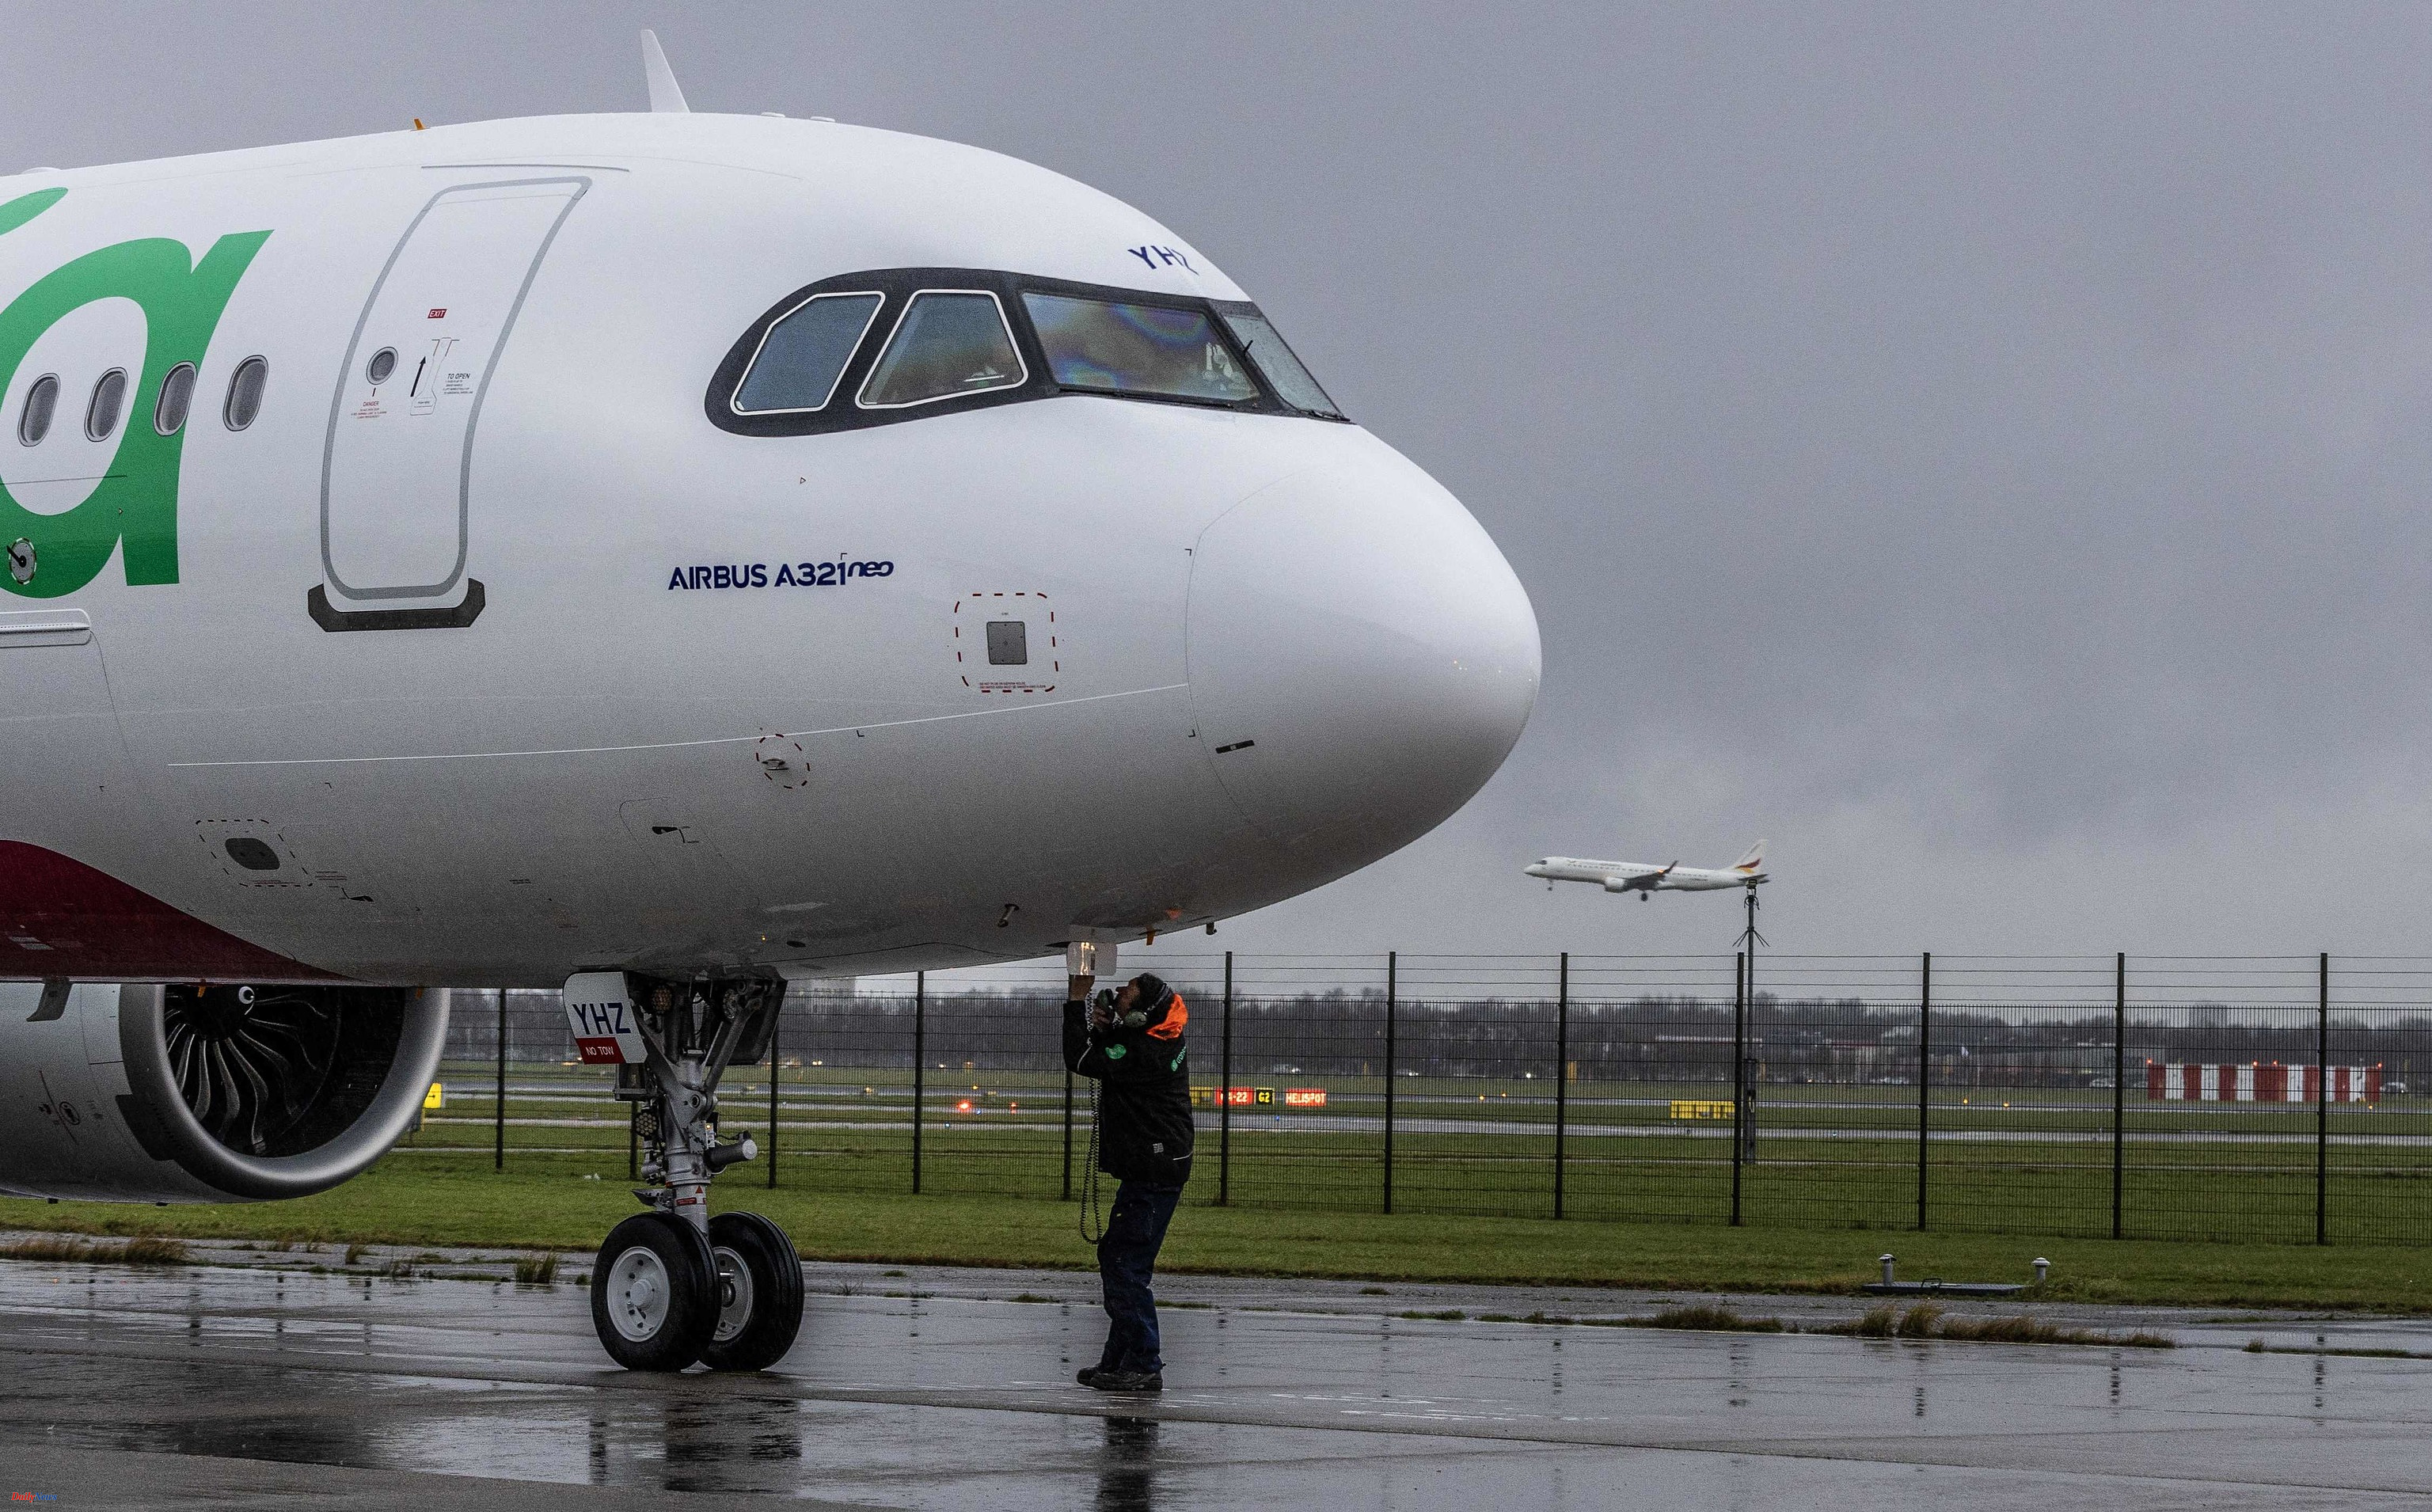 France More than 700 Airbus workers poisoned after Christmas lunch